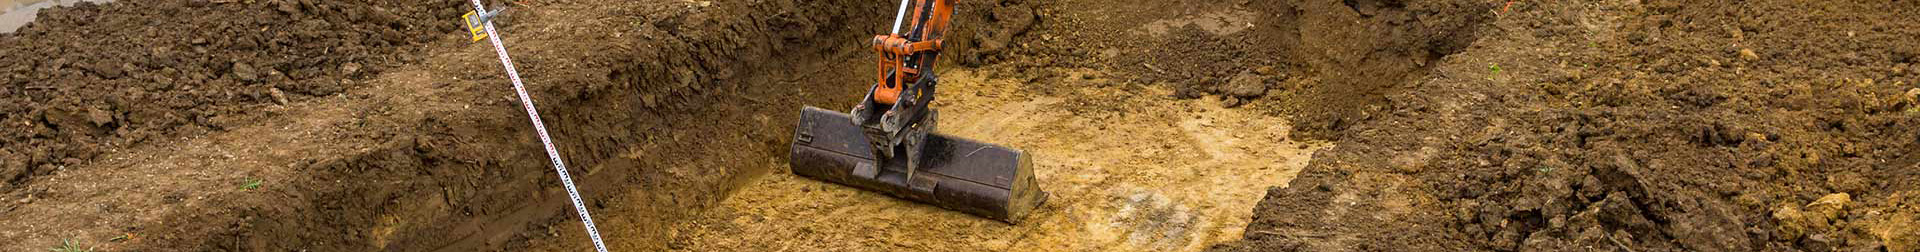 excavator digging the foundation of a pool in a residential dirt covered backyard